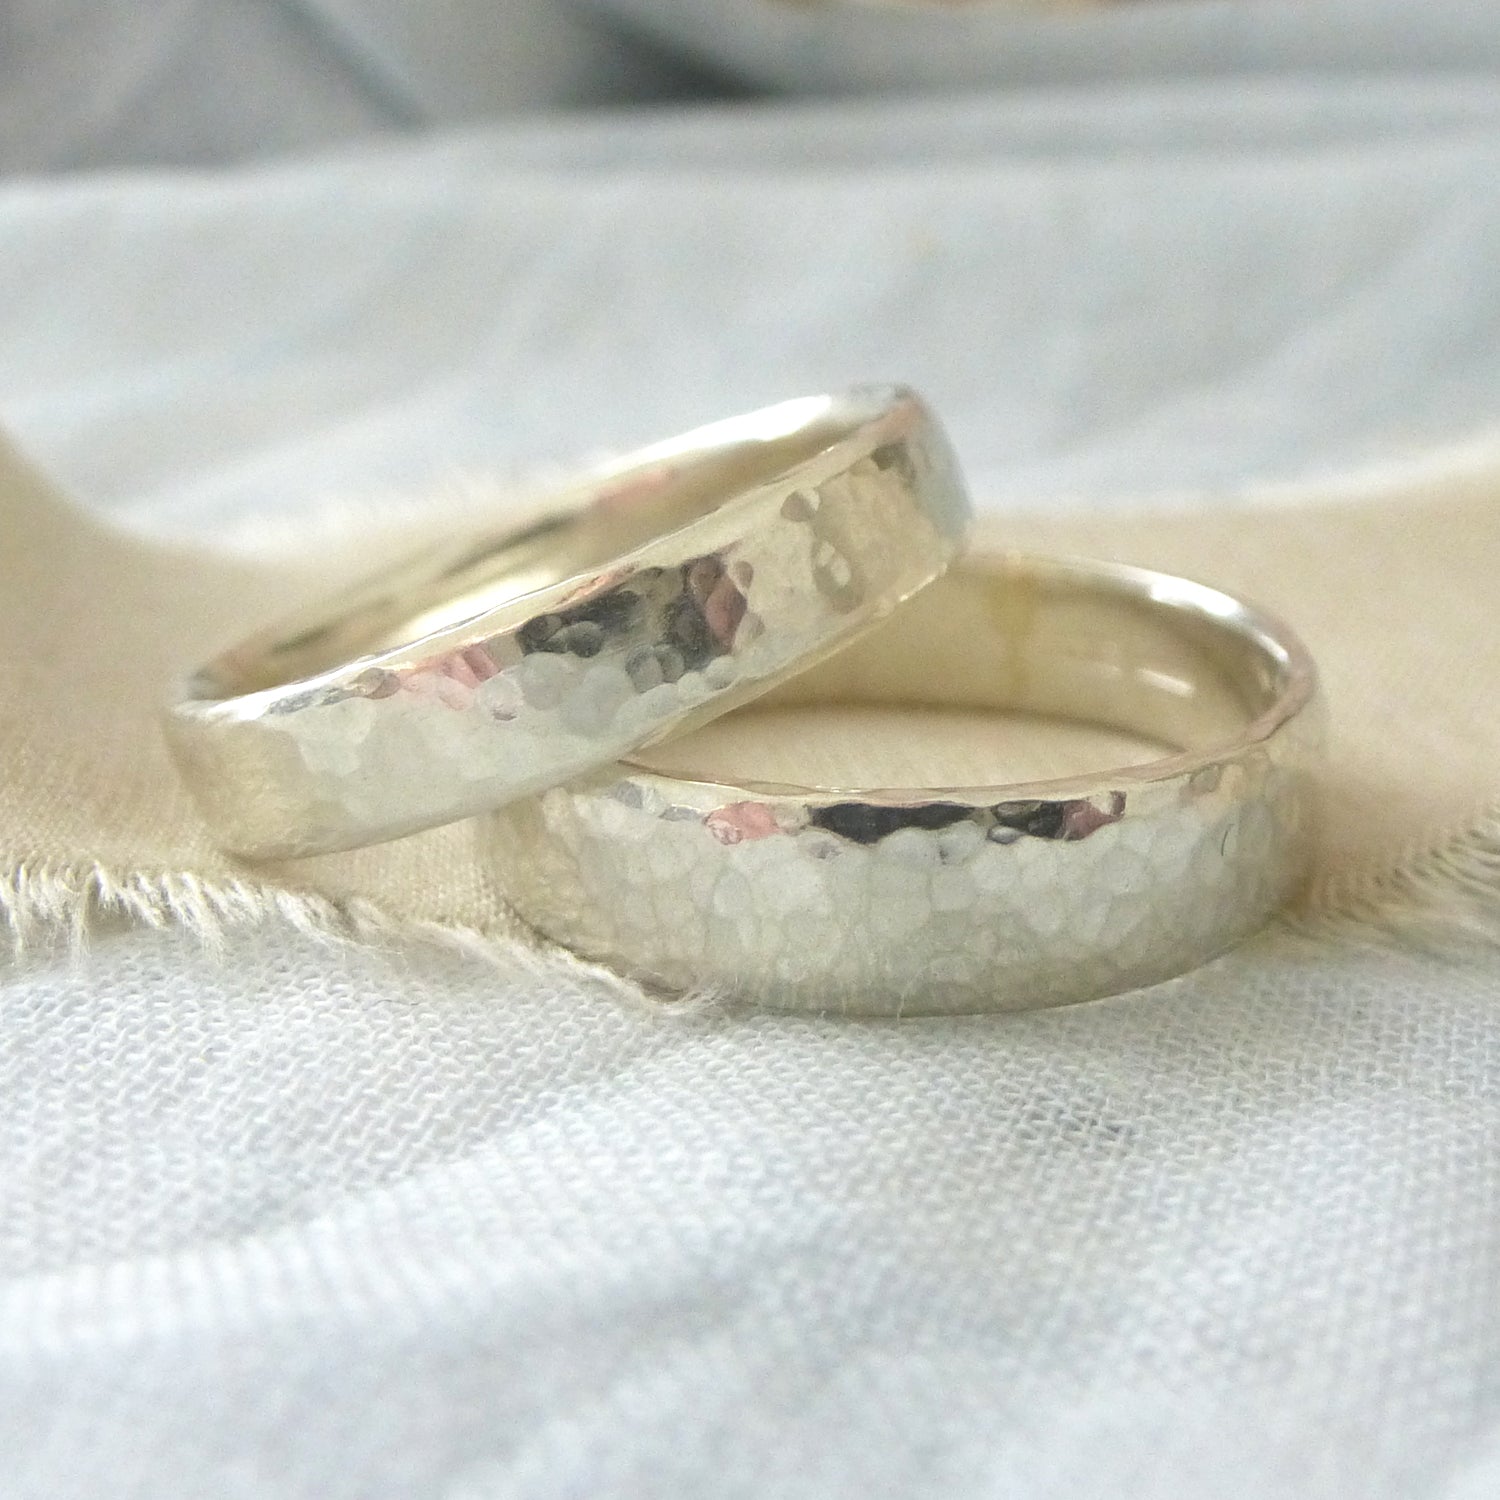 A pair of handmade wedding rings in 9ct white hammered gold, 100% recycled gold, Upper band 4mm, lower band 5mm